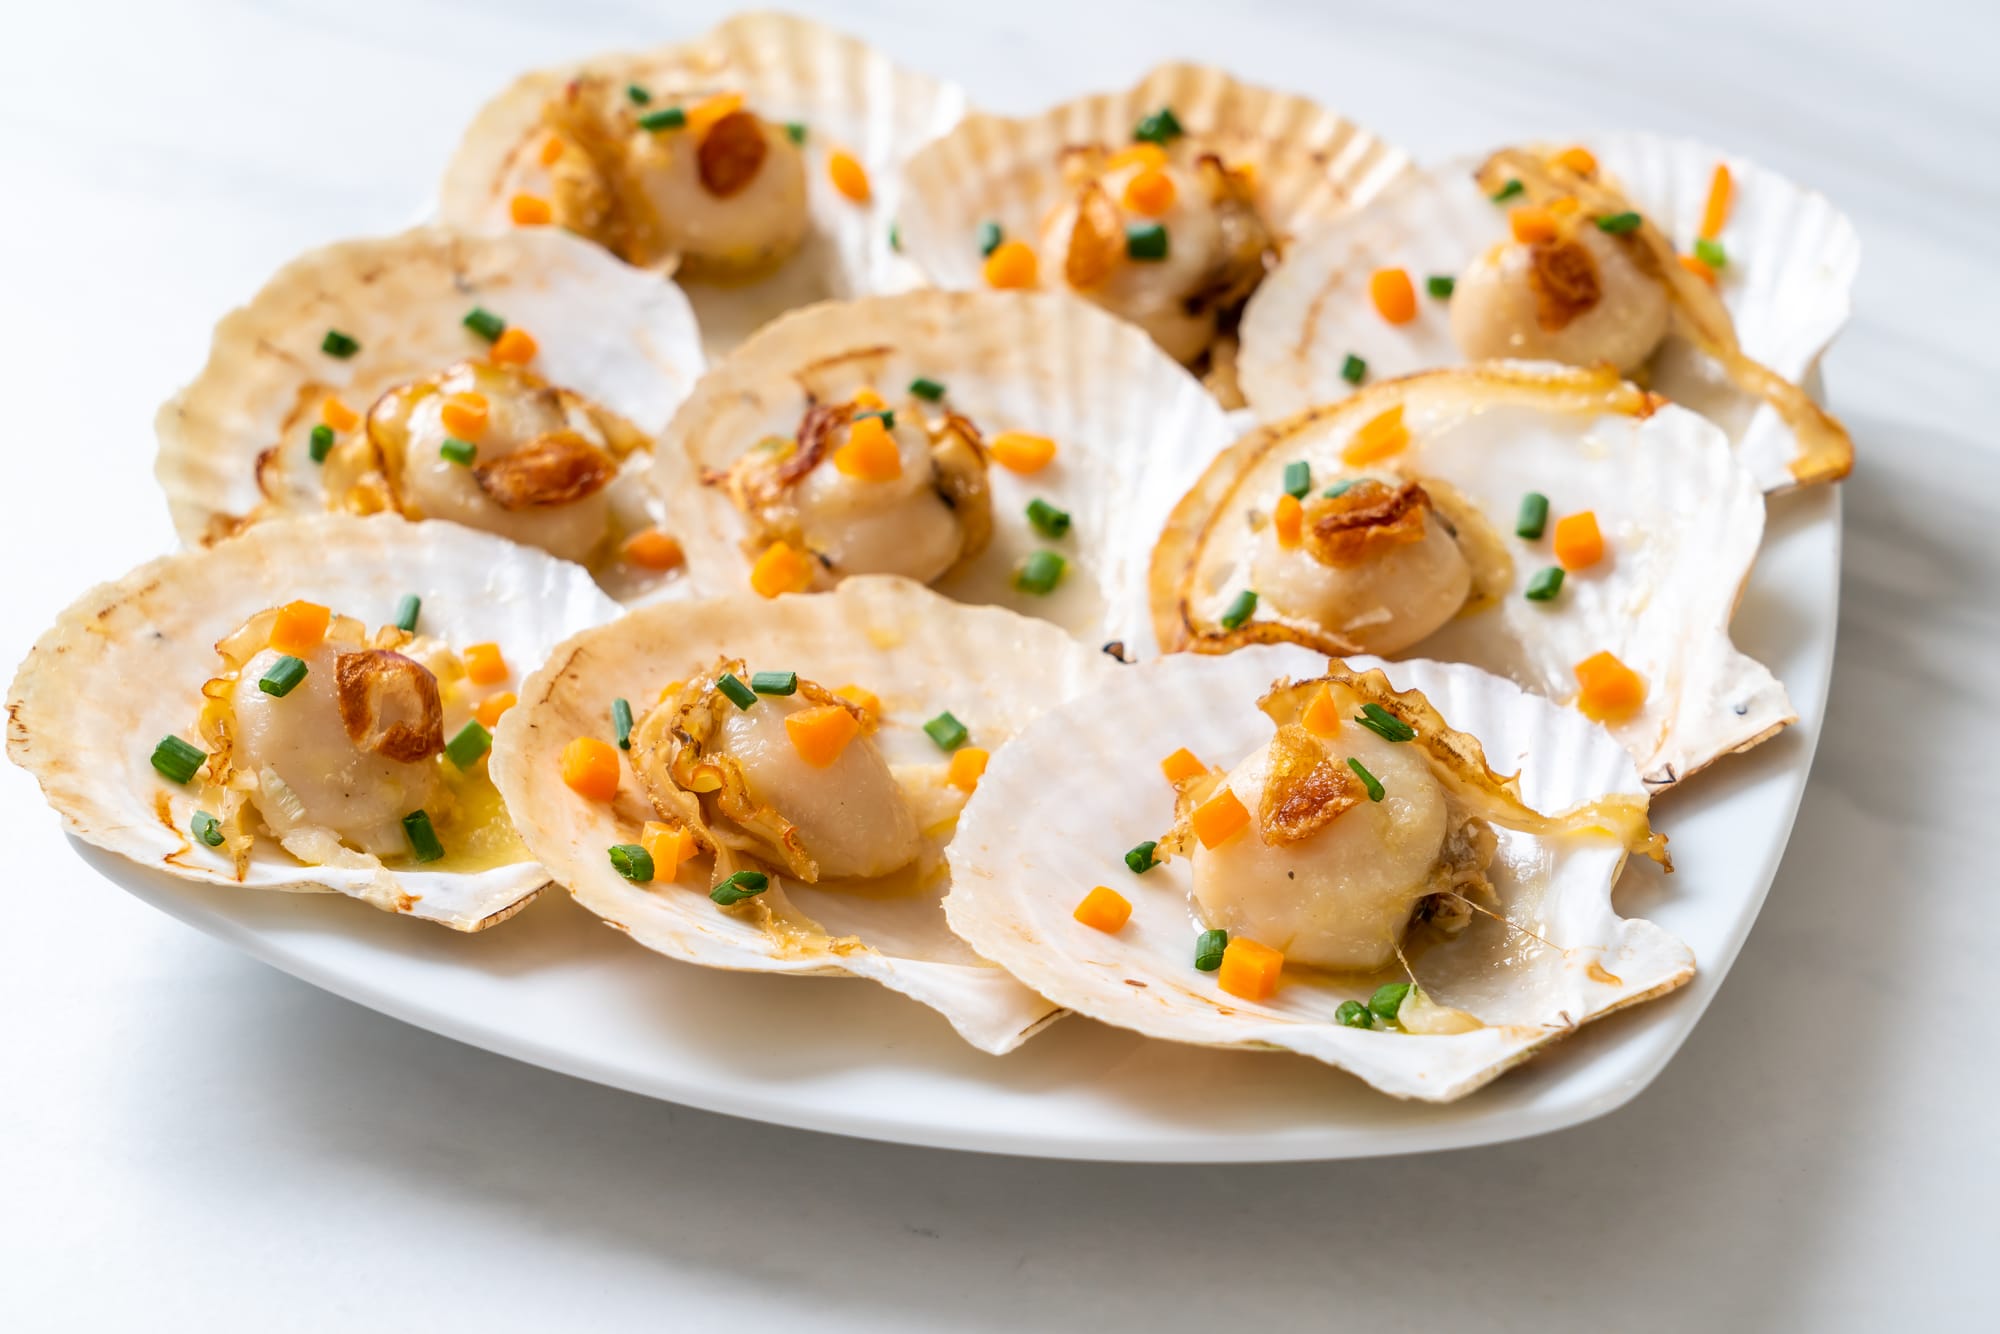 Grilled Scallops with Hazelnuts